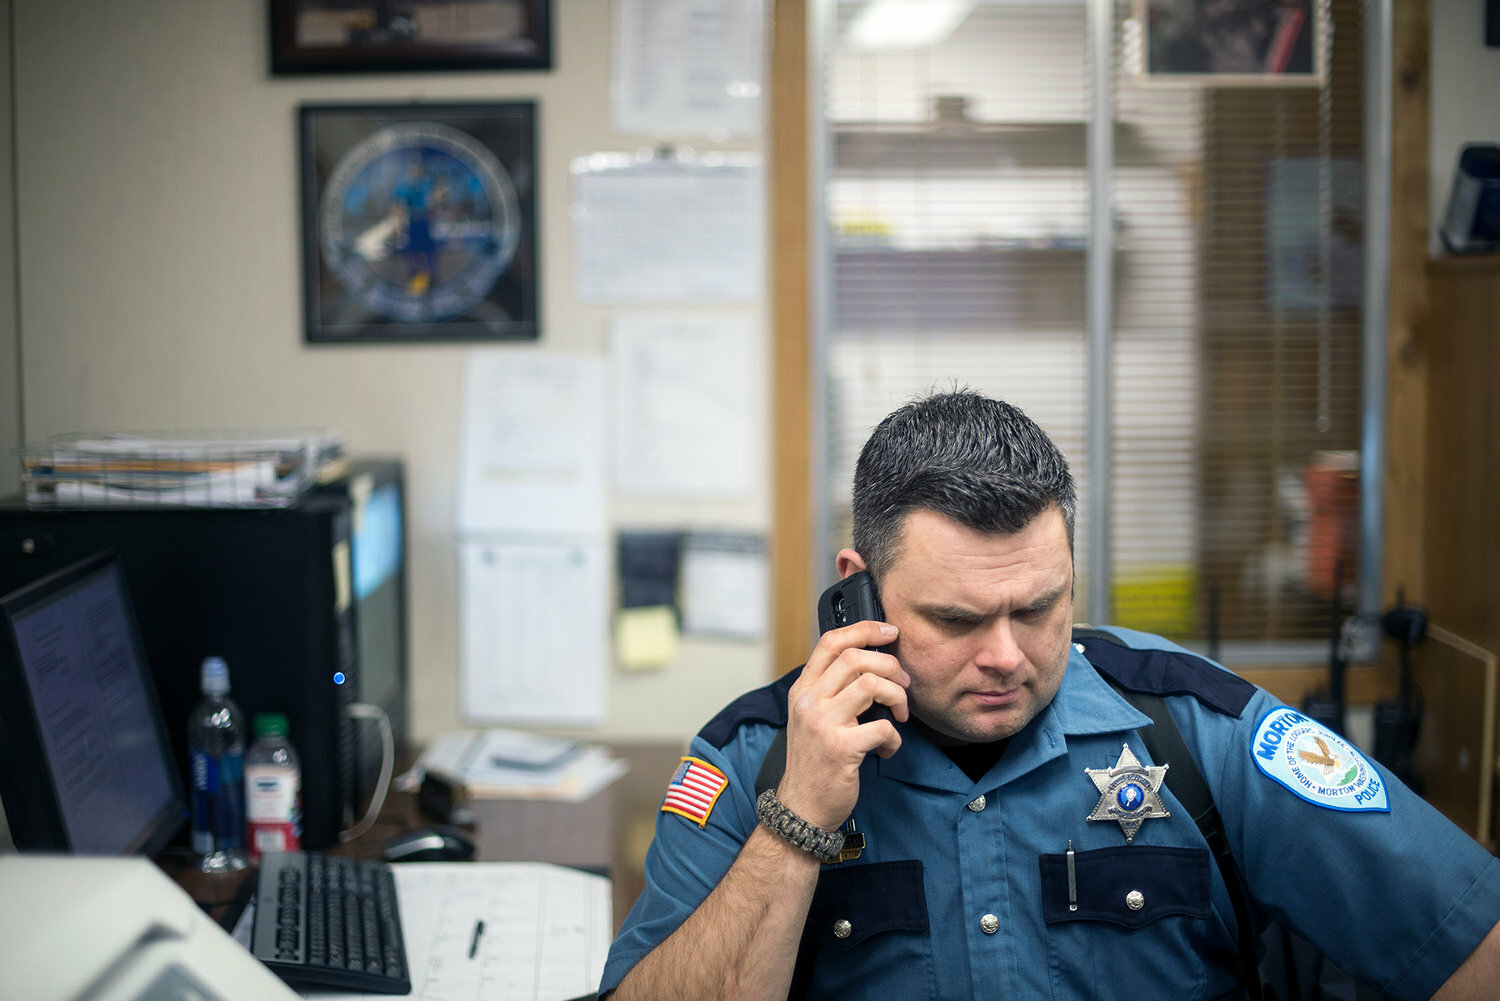 Former Morton Police Chief Roger Morningstar takes a phone call during an interview with The Chronicle in this 2016 file photo.